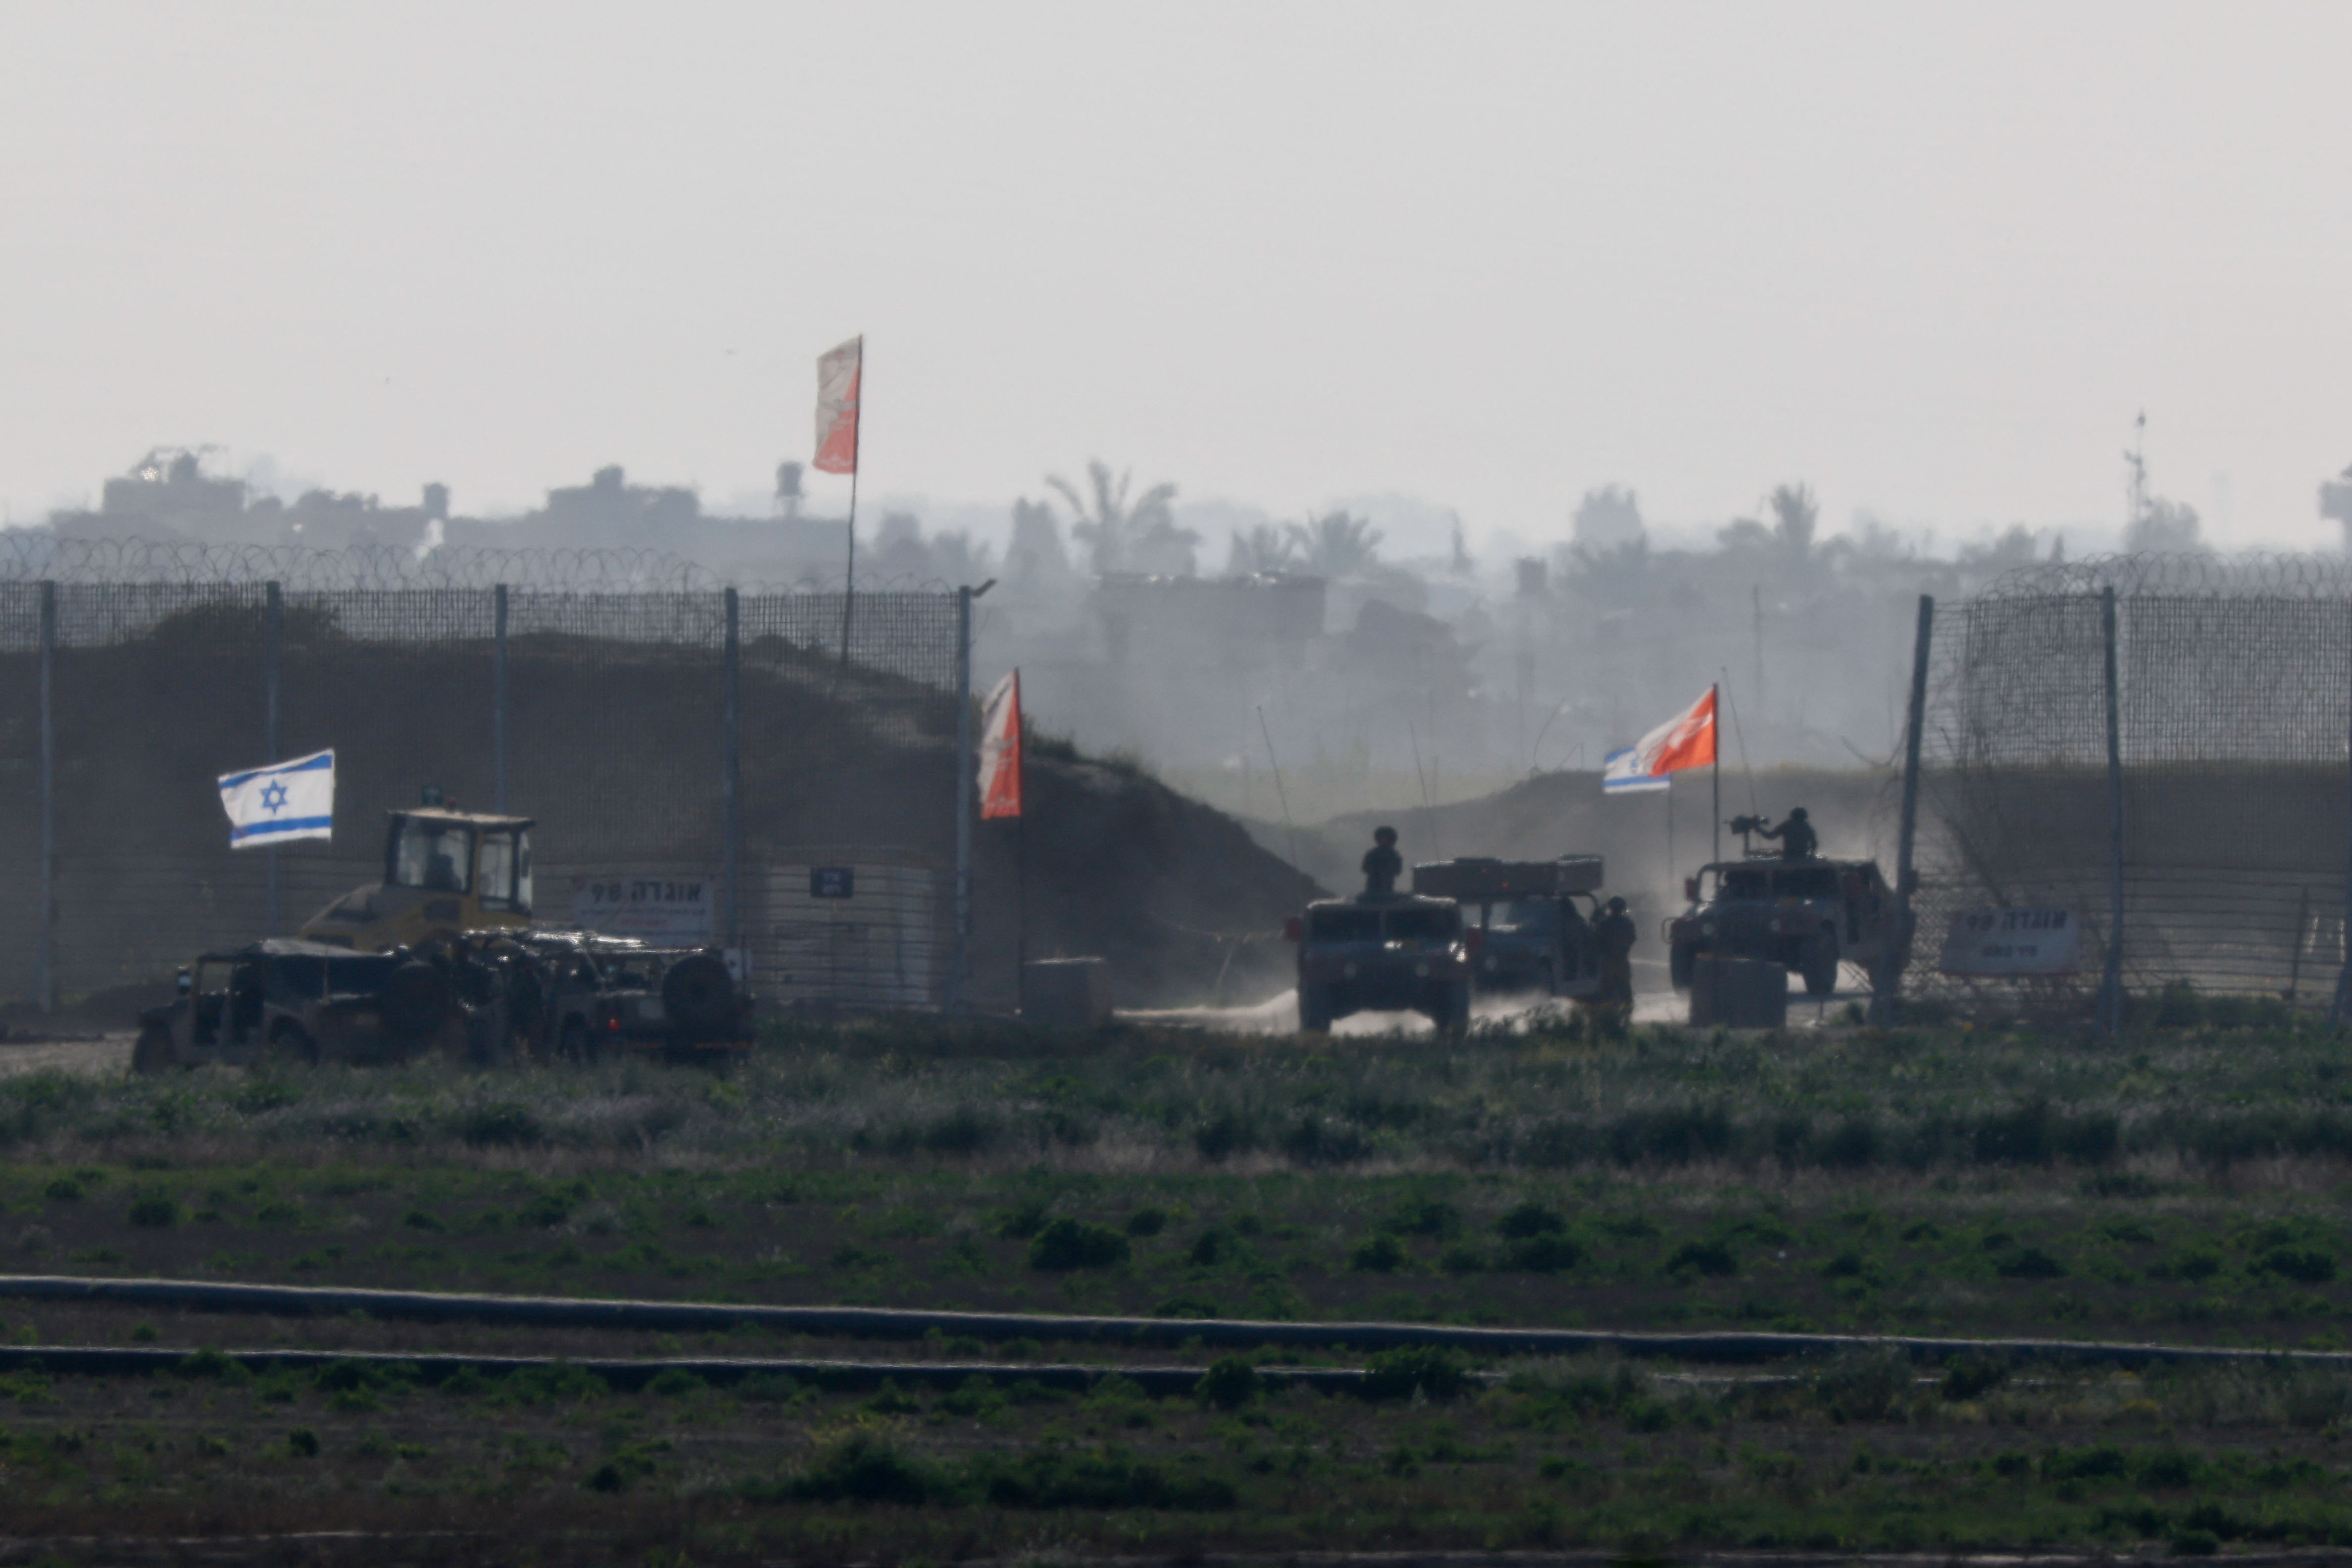 Israeli military vehicles move out from the Gaza Strip, as seen from Israel